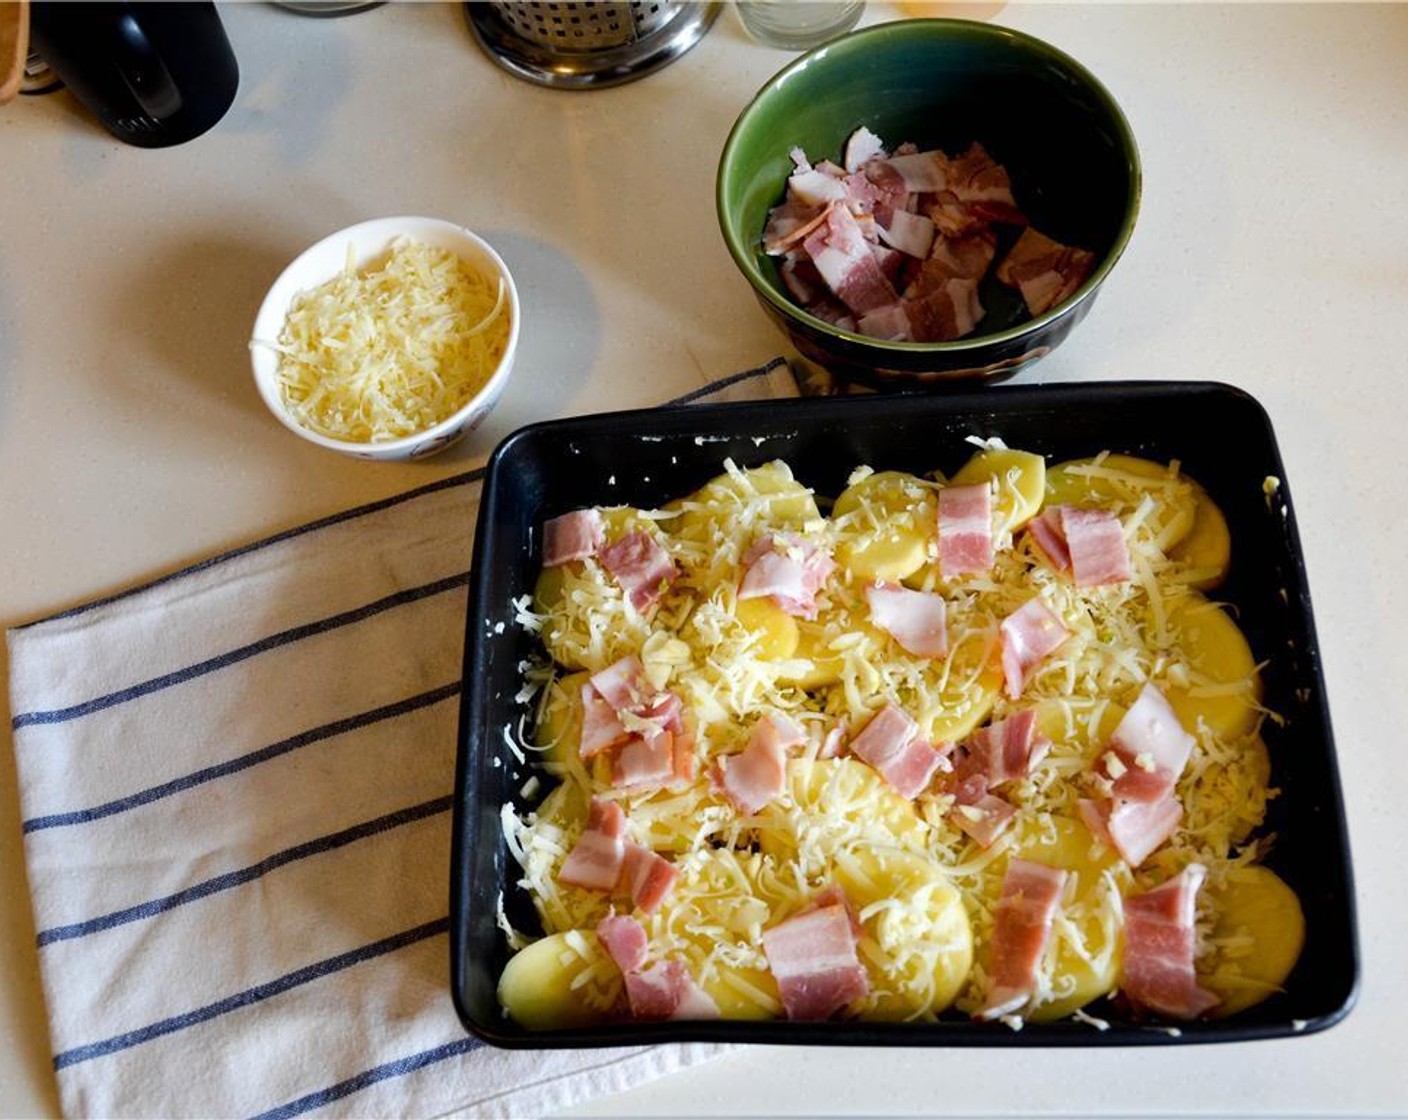 step 6 Spread half of the chopped potato at the bottom of the tray. Then, cover the potatos with half of the cheese and half of the bacon. Add another layer of potato followed by the remaining cheese and bacon.